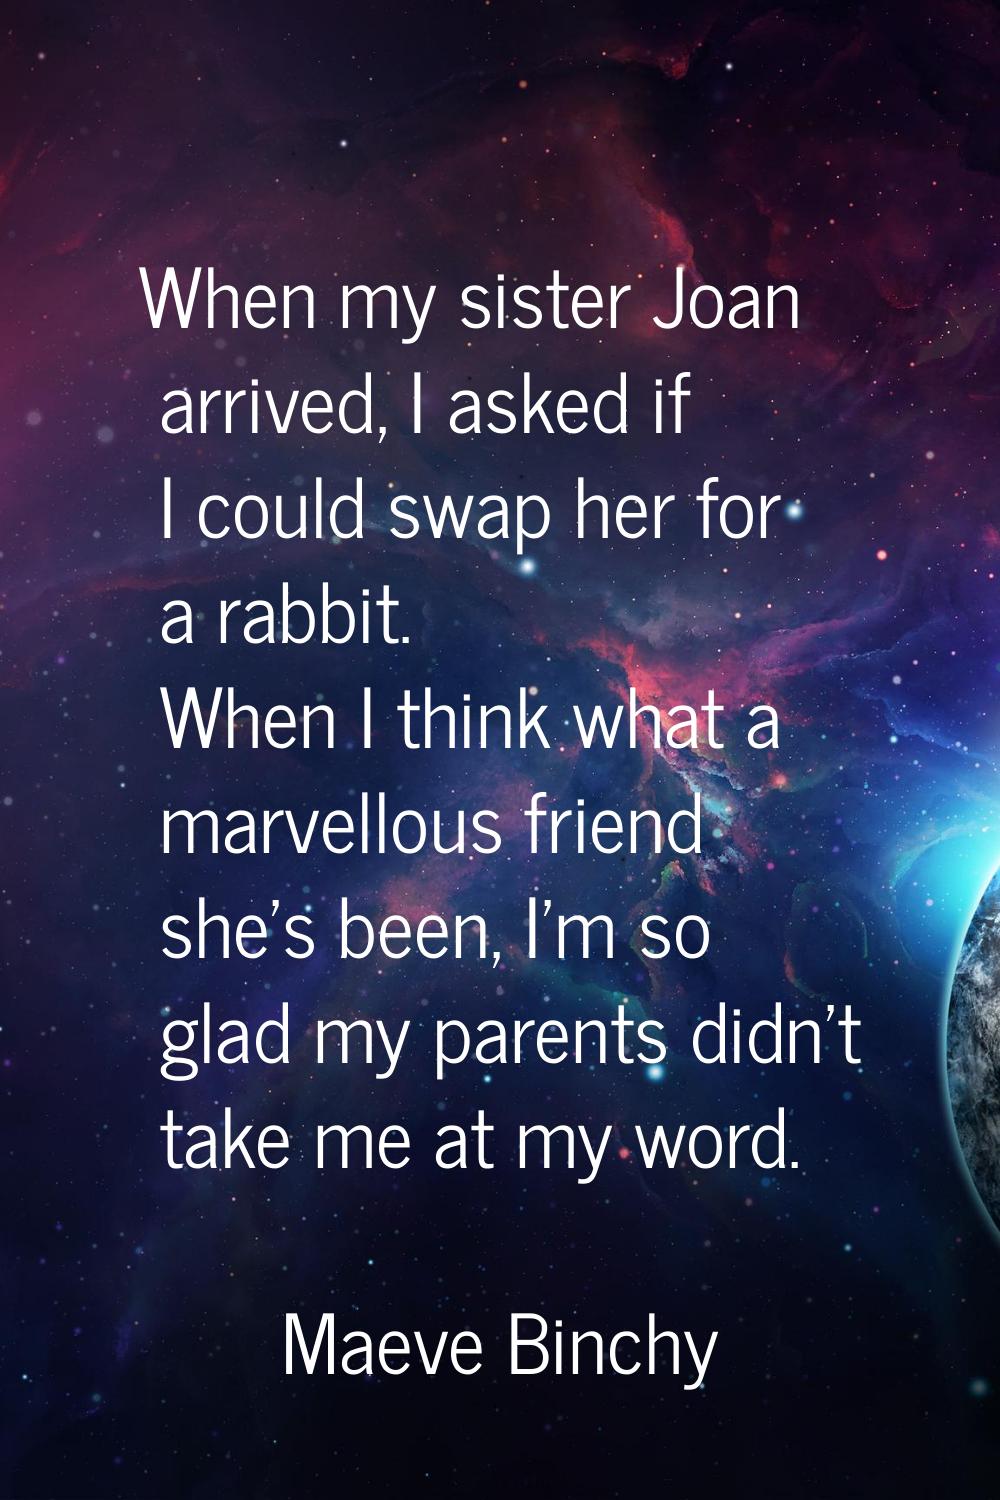 When my sister Joan arrived, I asked if I could swap her for a rabbit. When I think what a marvello